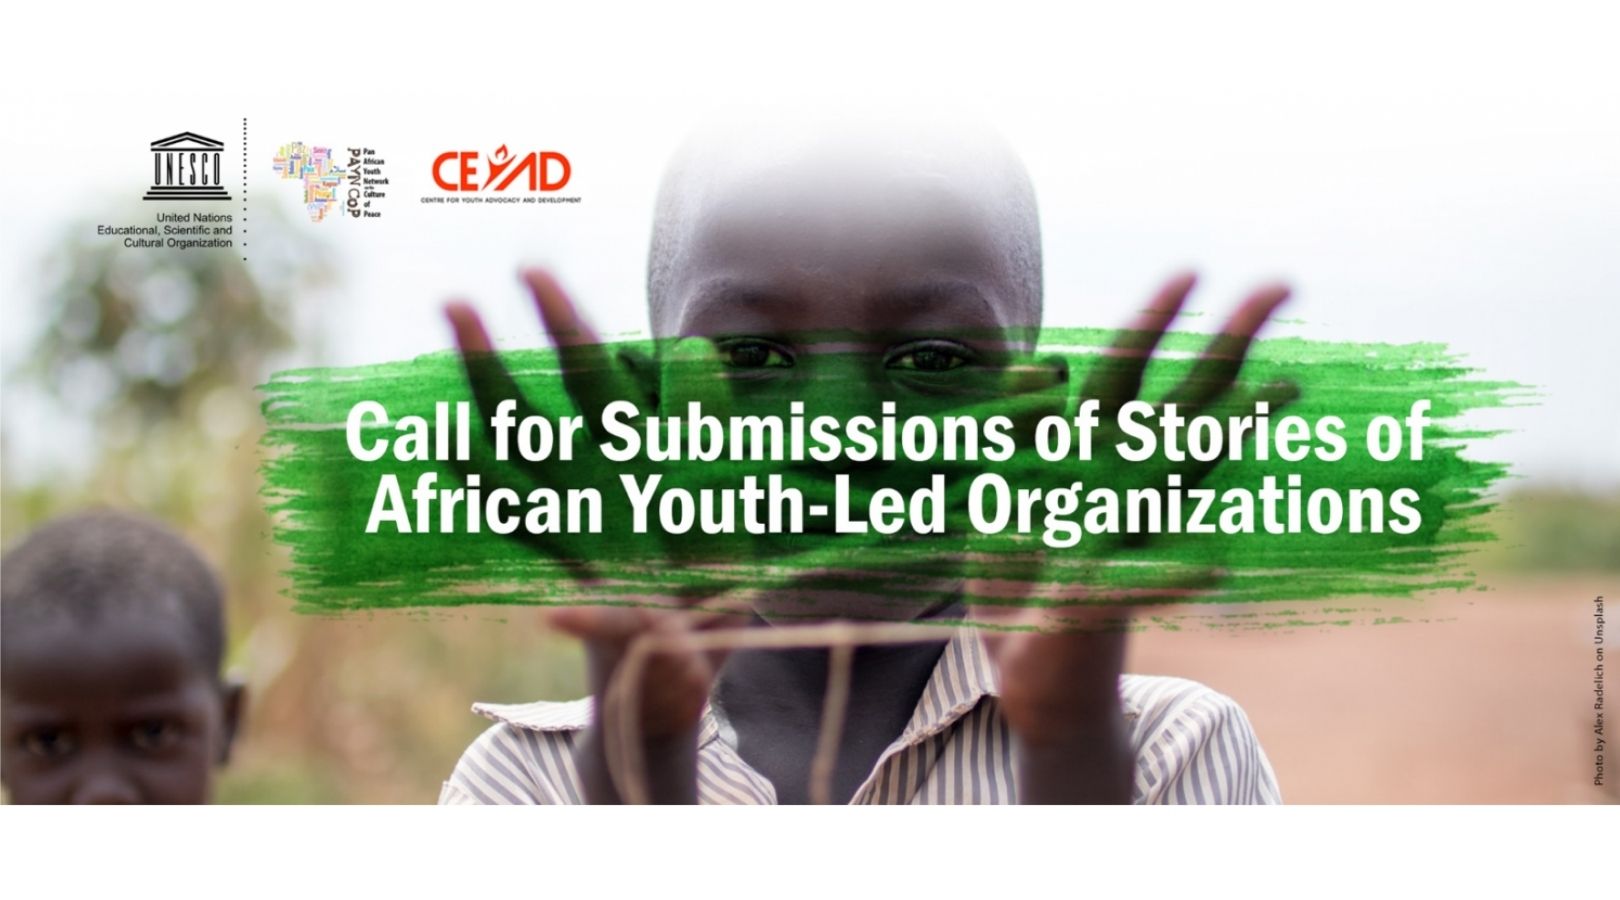 Call for Submission/Nomination of Stories of African Youth-Led Organizations 2020